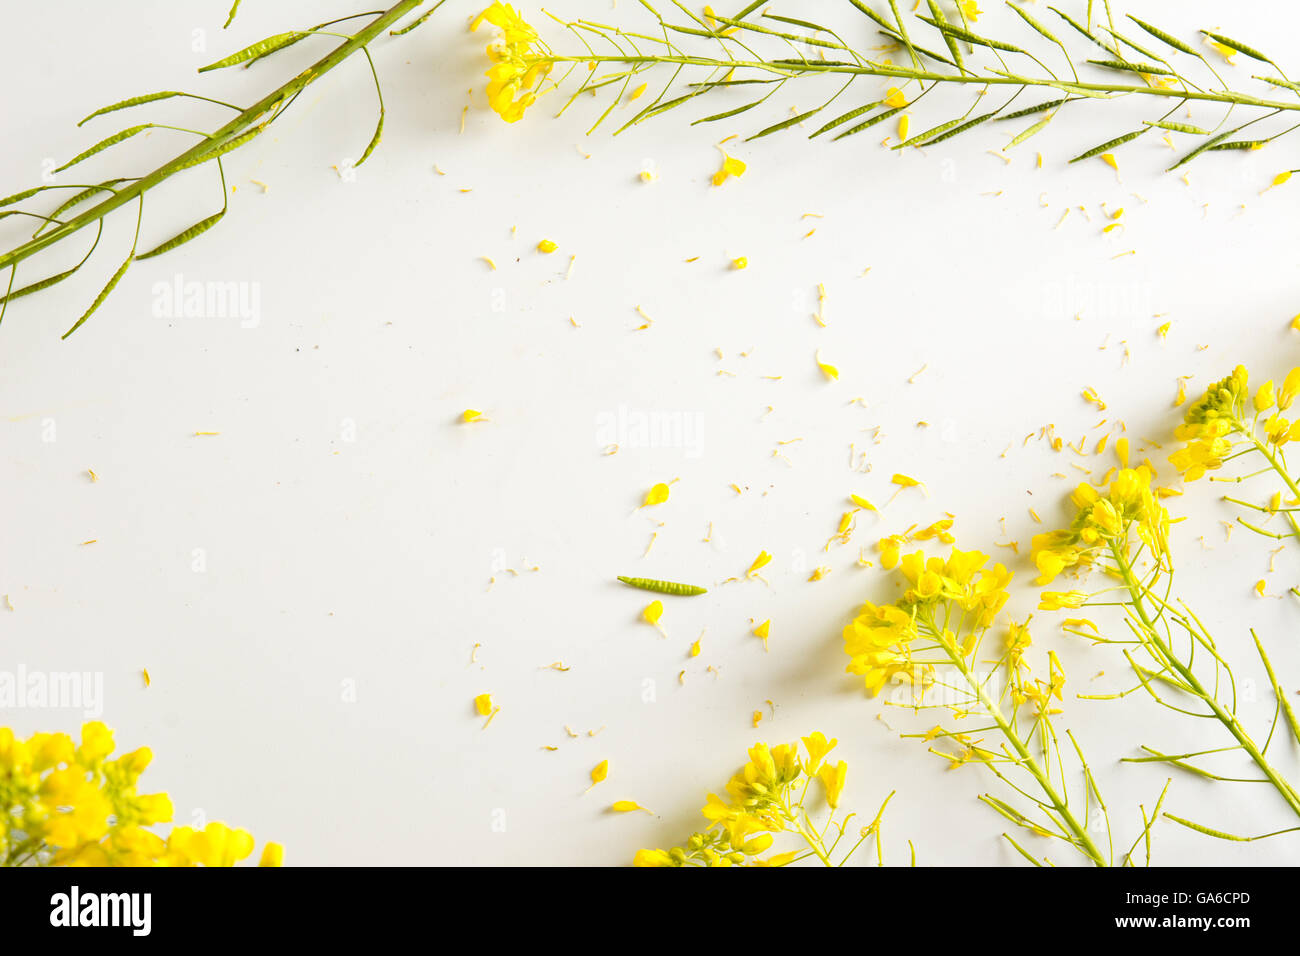 florist, worktable with wild yellow flowers, on white table Stock Photo